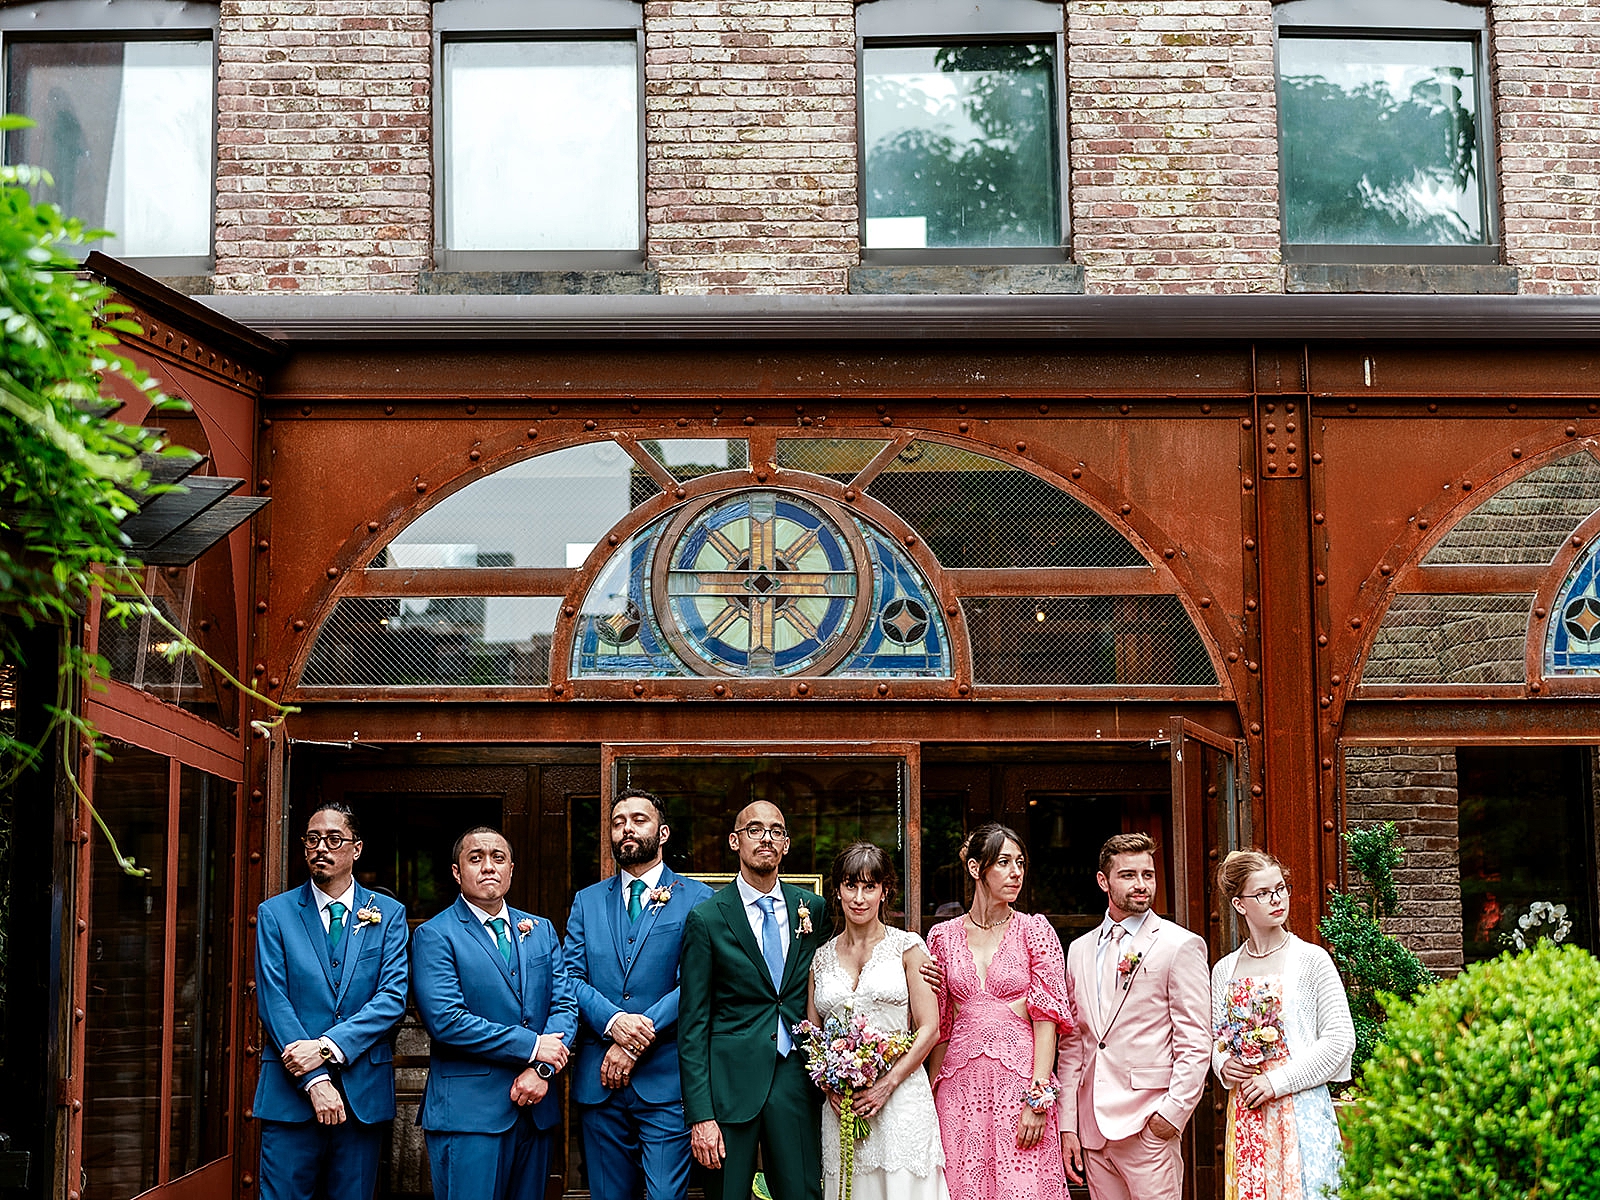 Upper body shot of the bride and groom posing with some of their wedding party in front of the venue. 